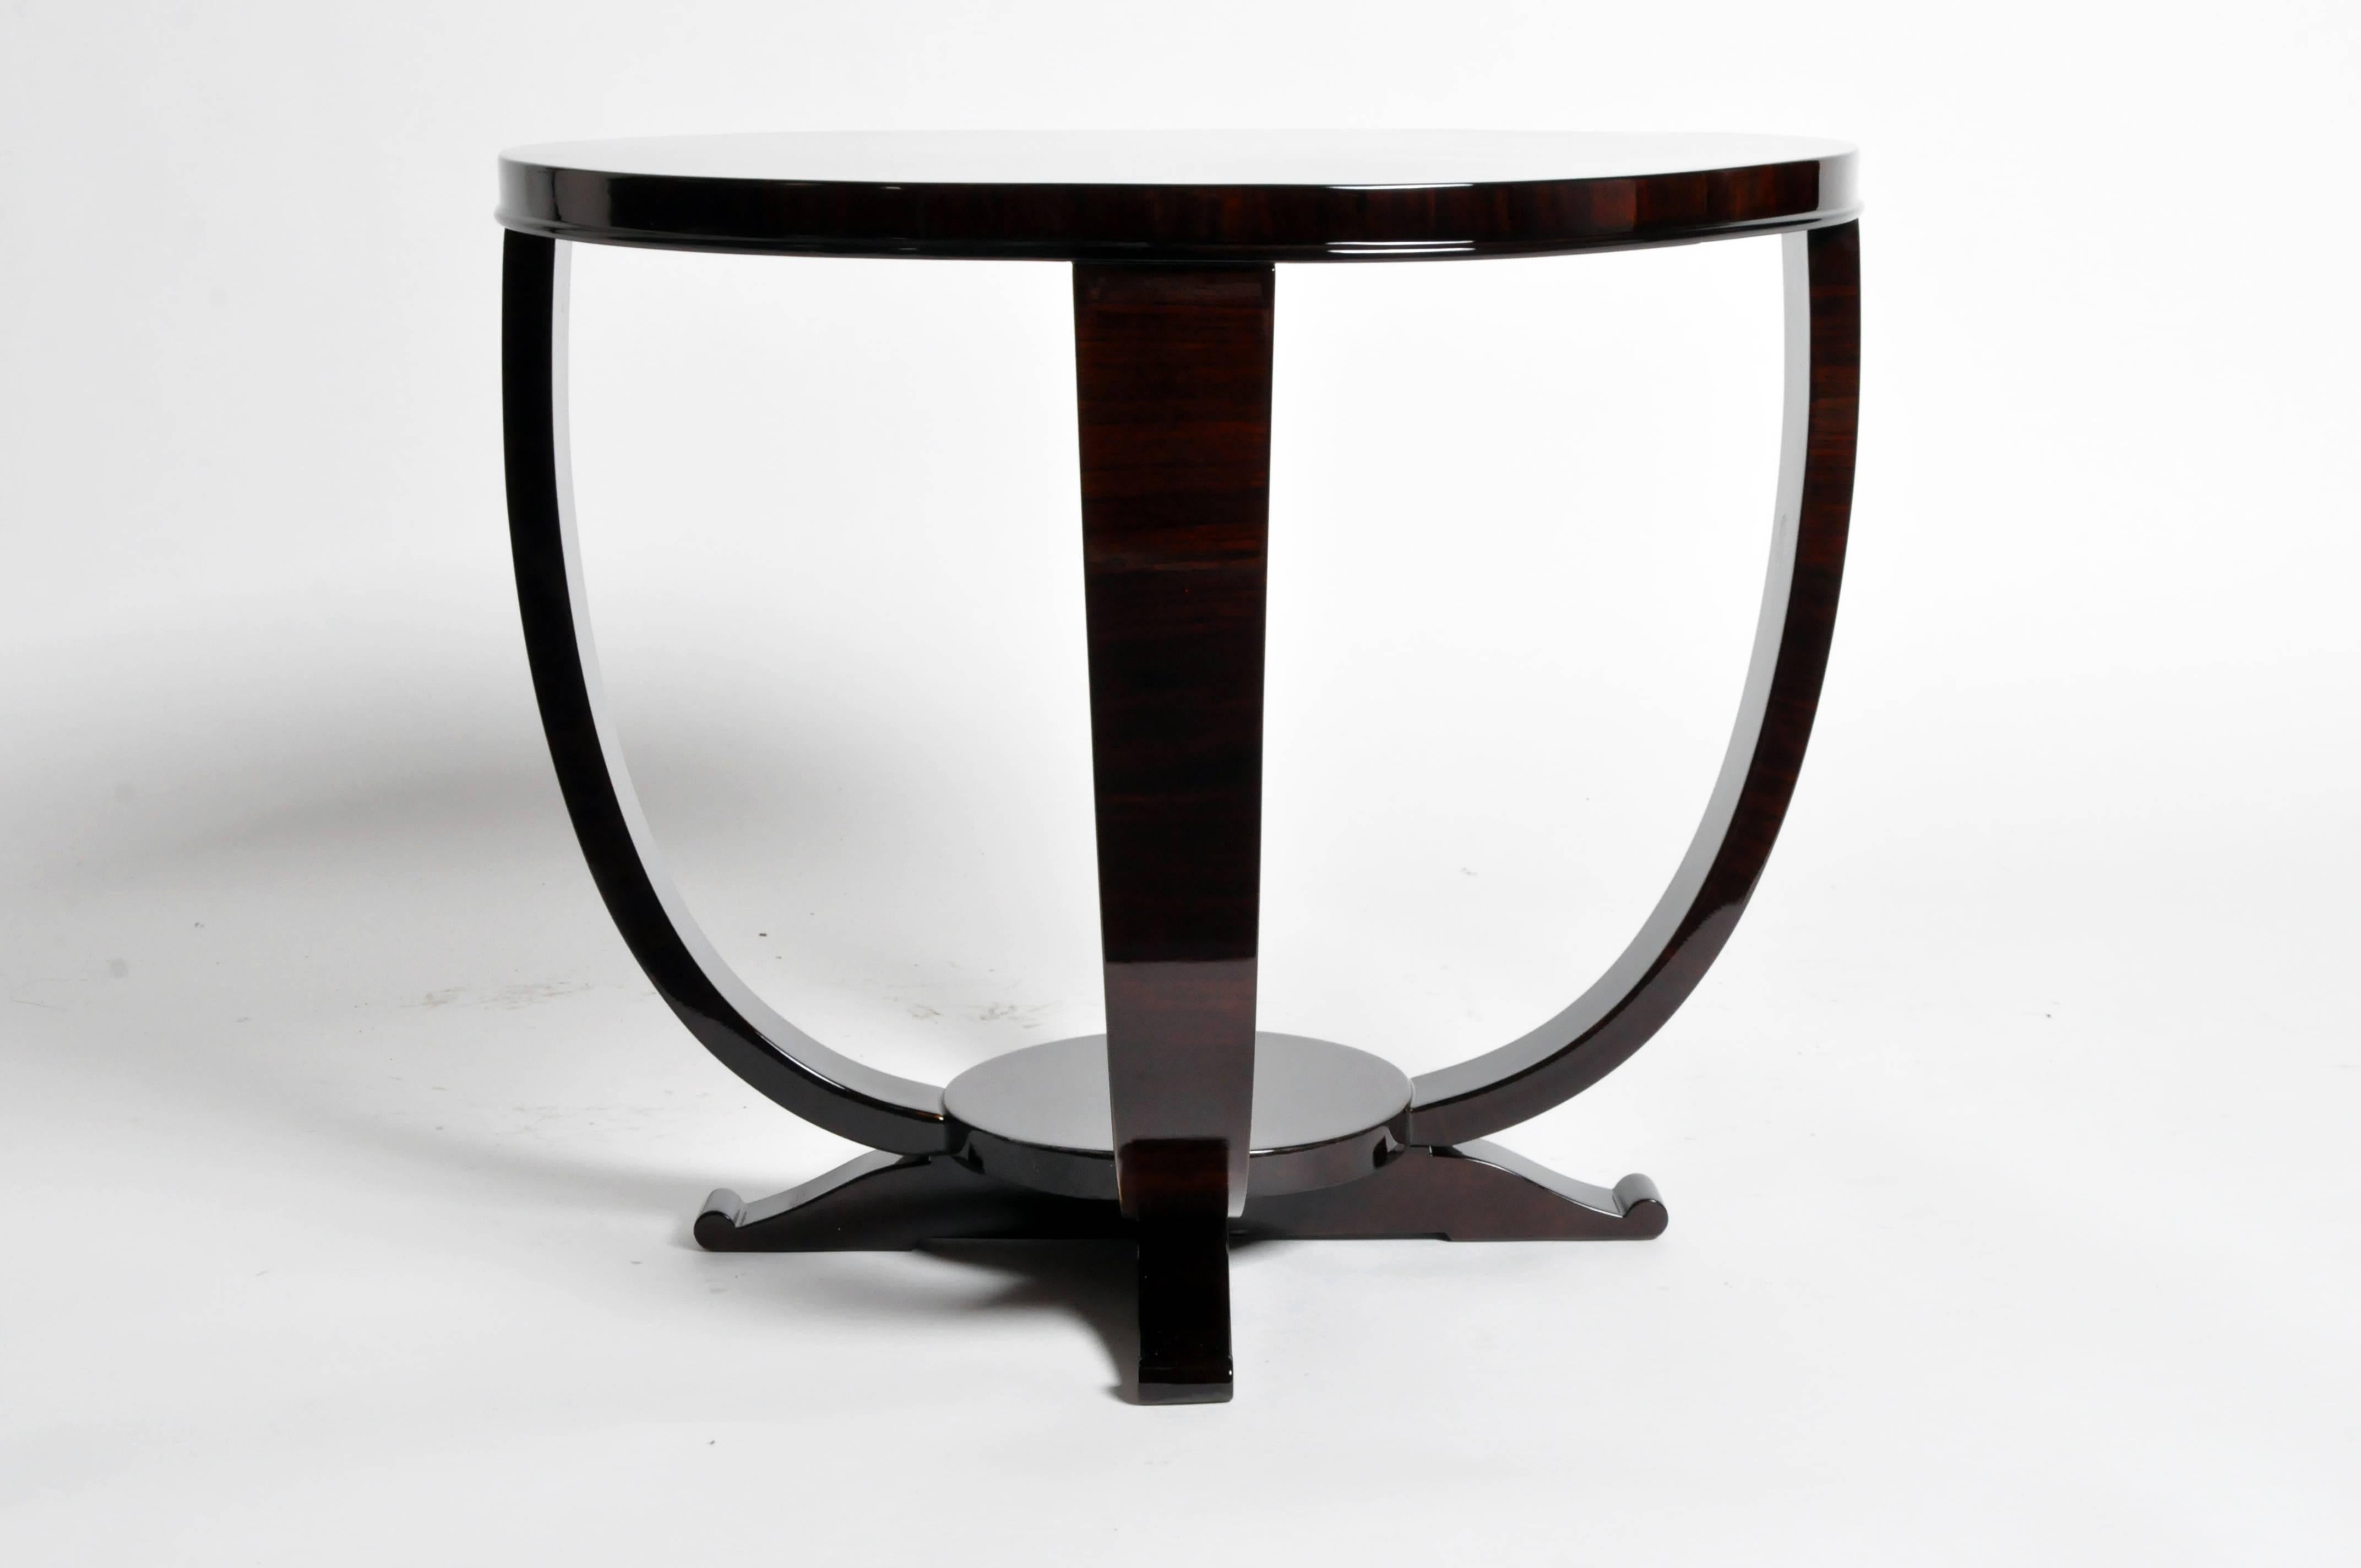 This impressive newly made round table is from Hungary and is made from walnut veneer.